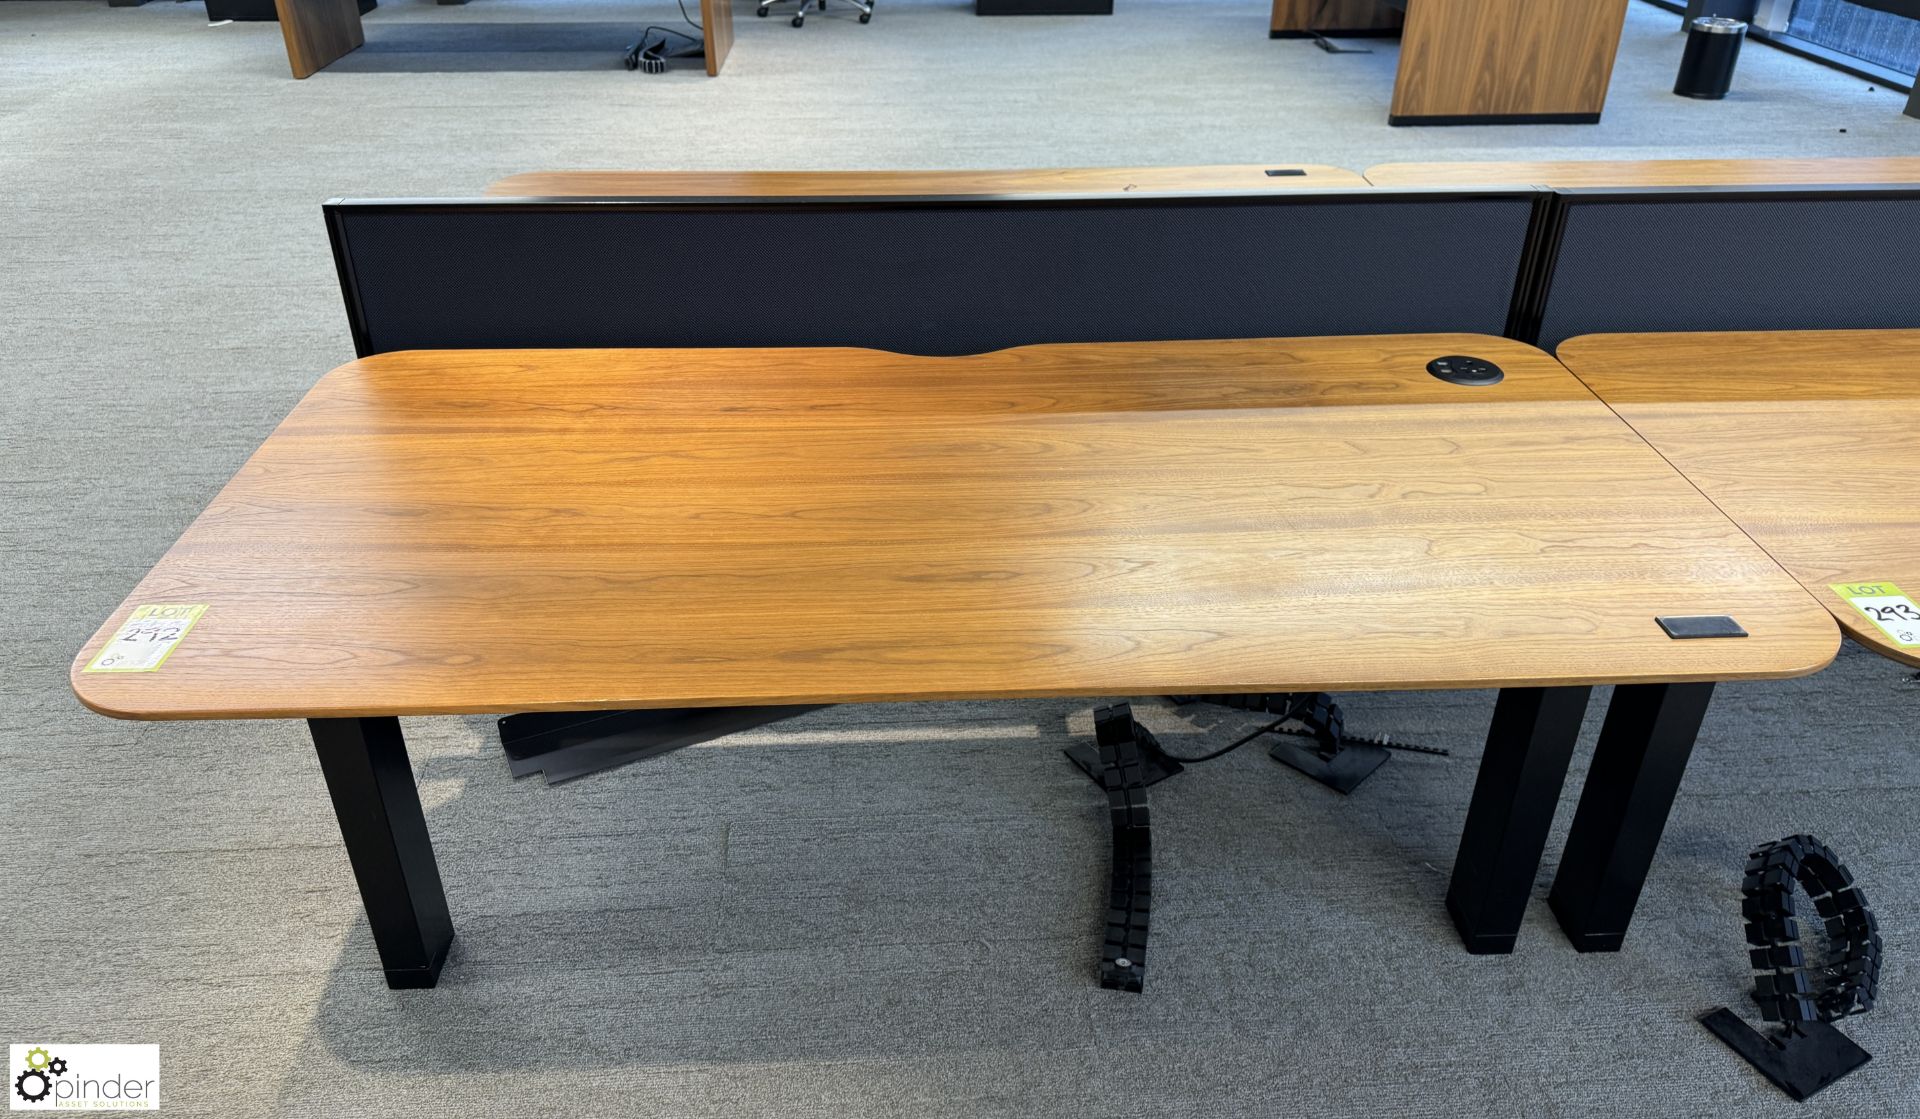 OMT back to back powered rise and fall Desks, 1600mm x 800mm per desk leaf, cherry veneer,with